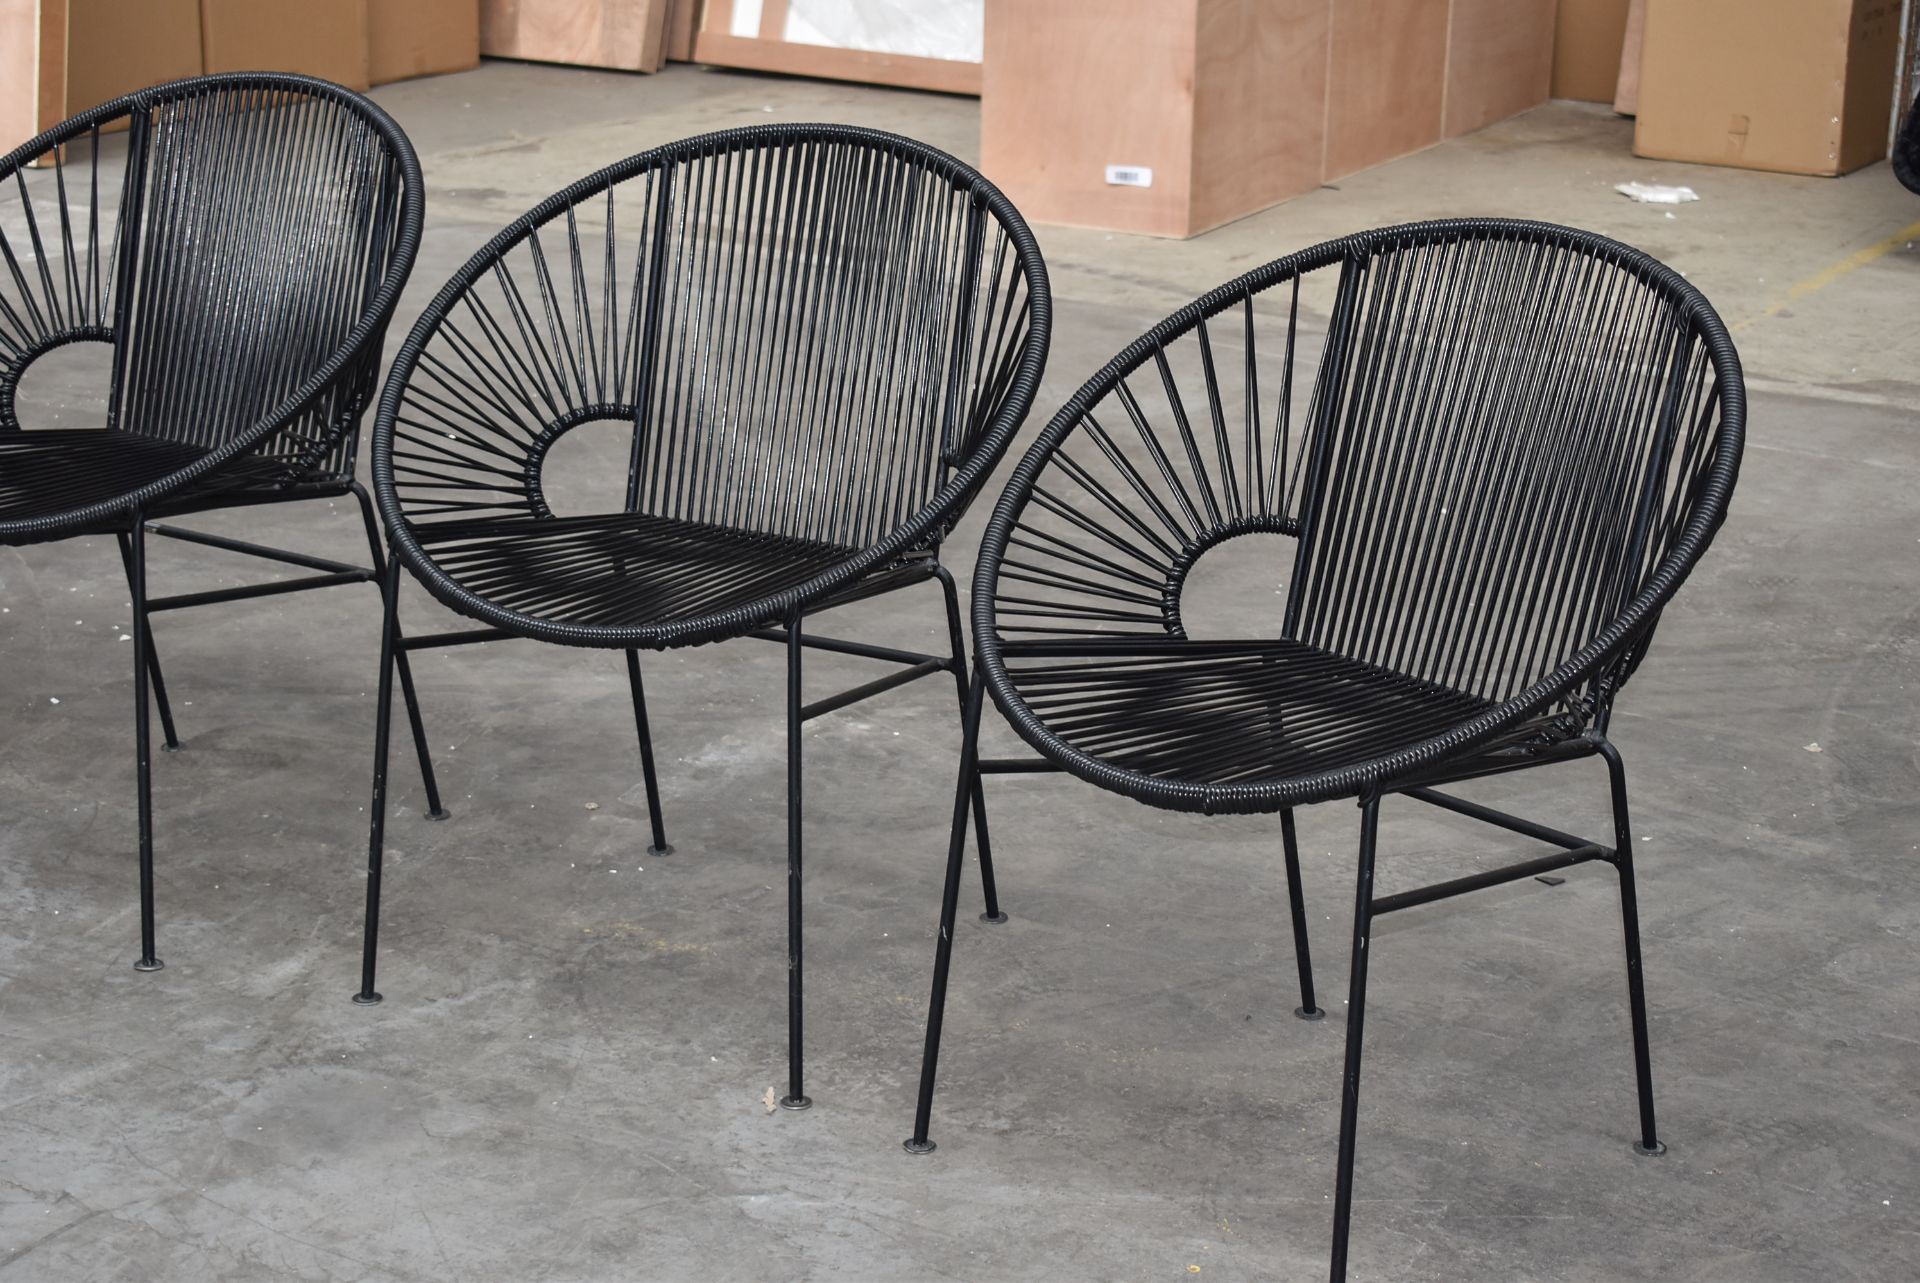 4 x Innit Designer Chairs - Acapulco Style Chairs in Black Suitable For Indoor or Outdoor Use - - Image 6 of 10